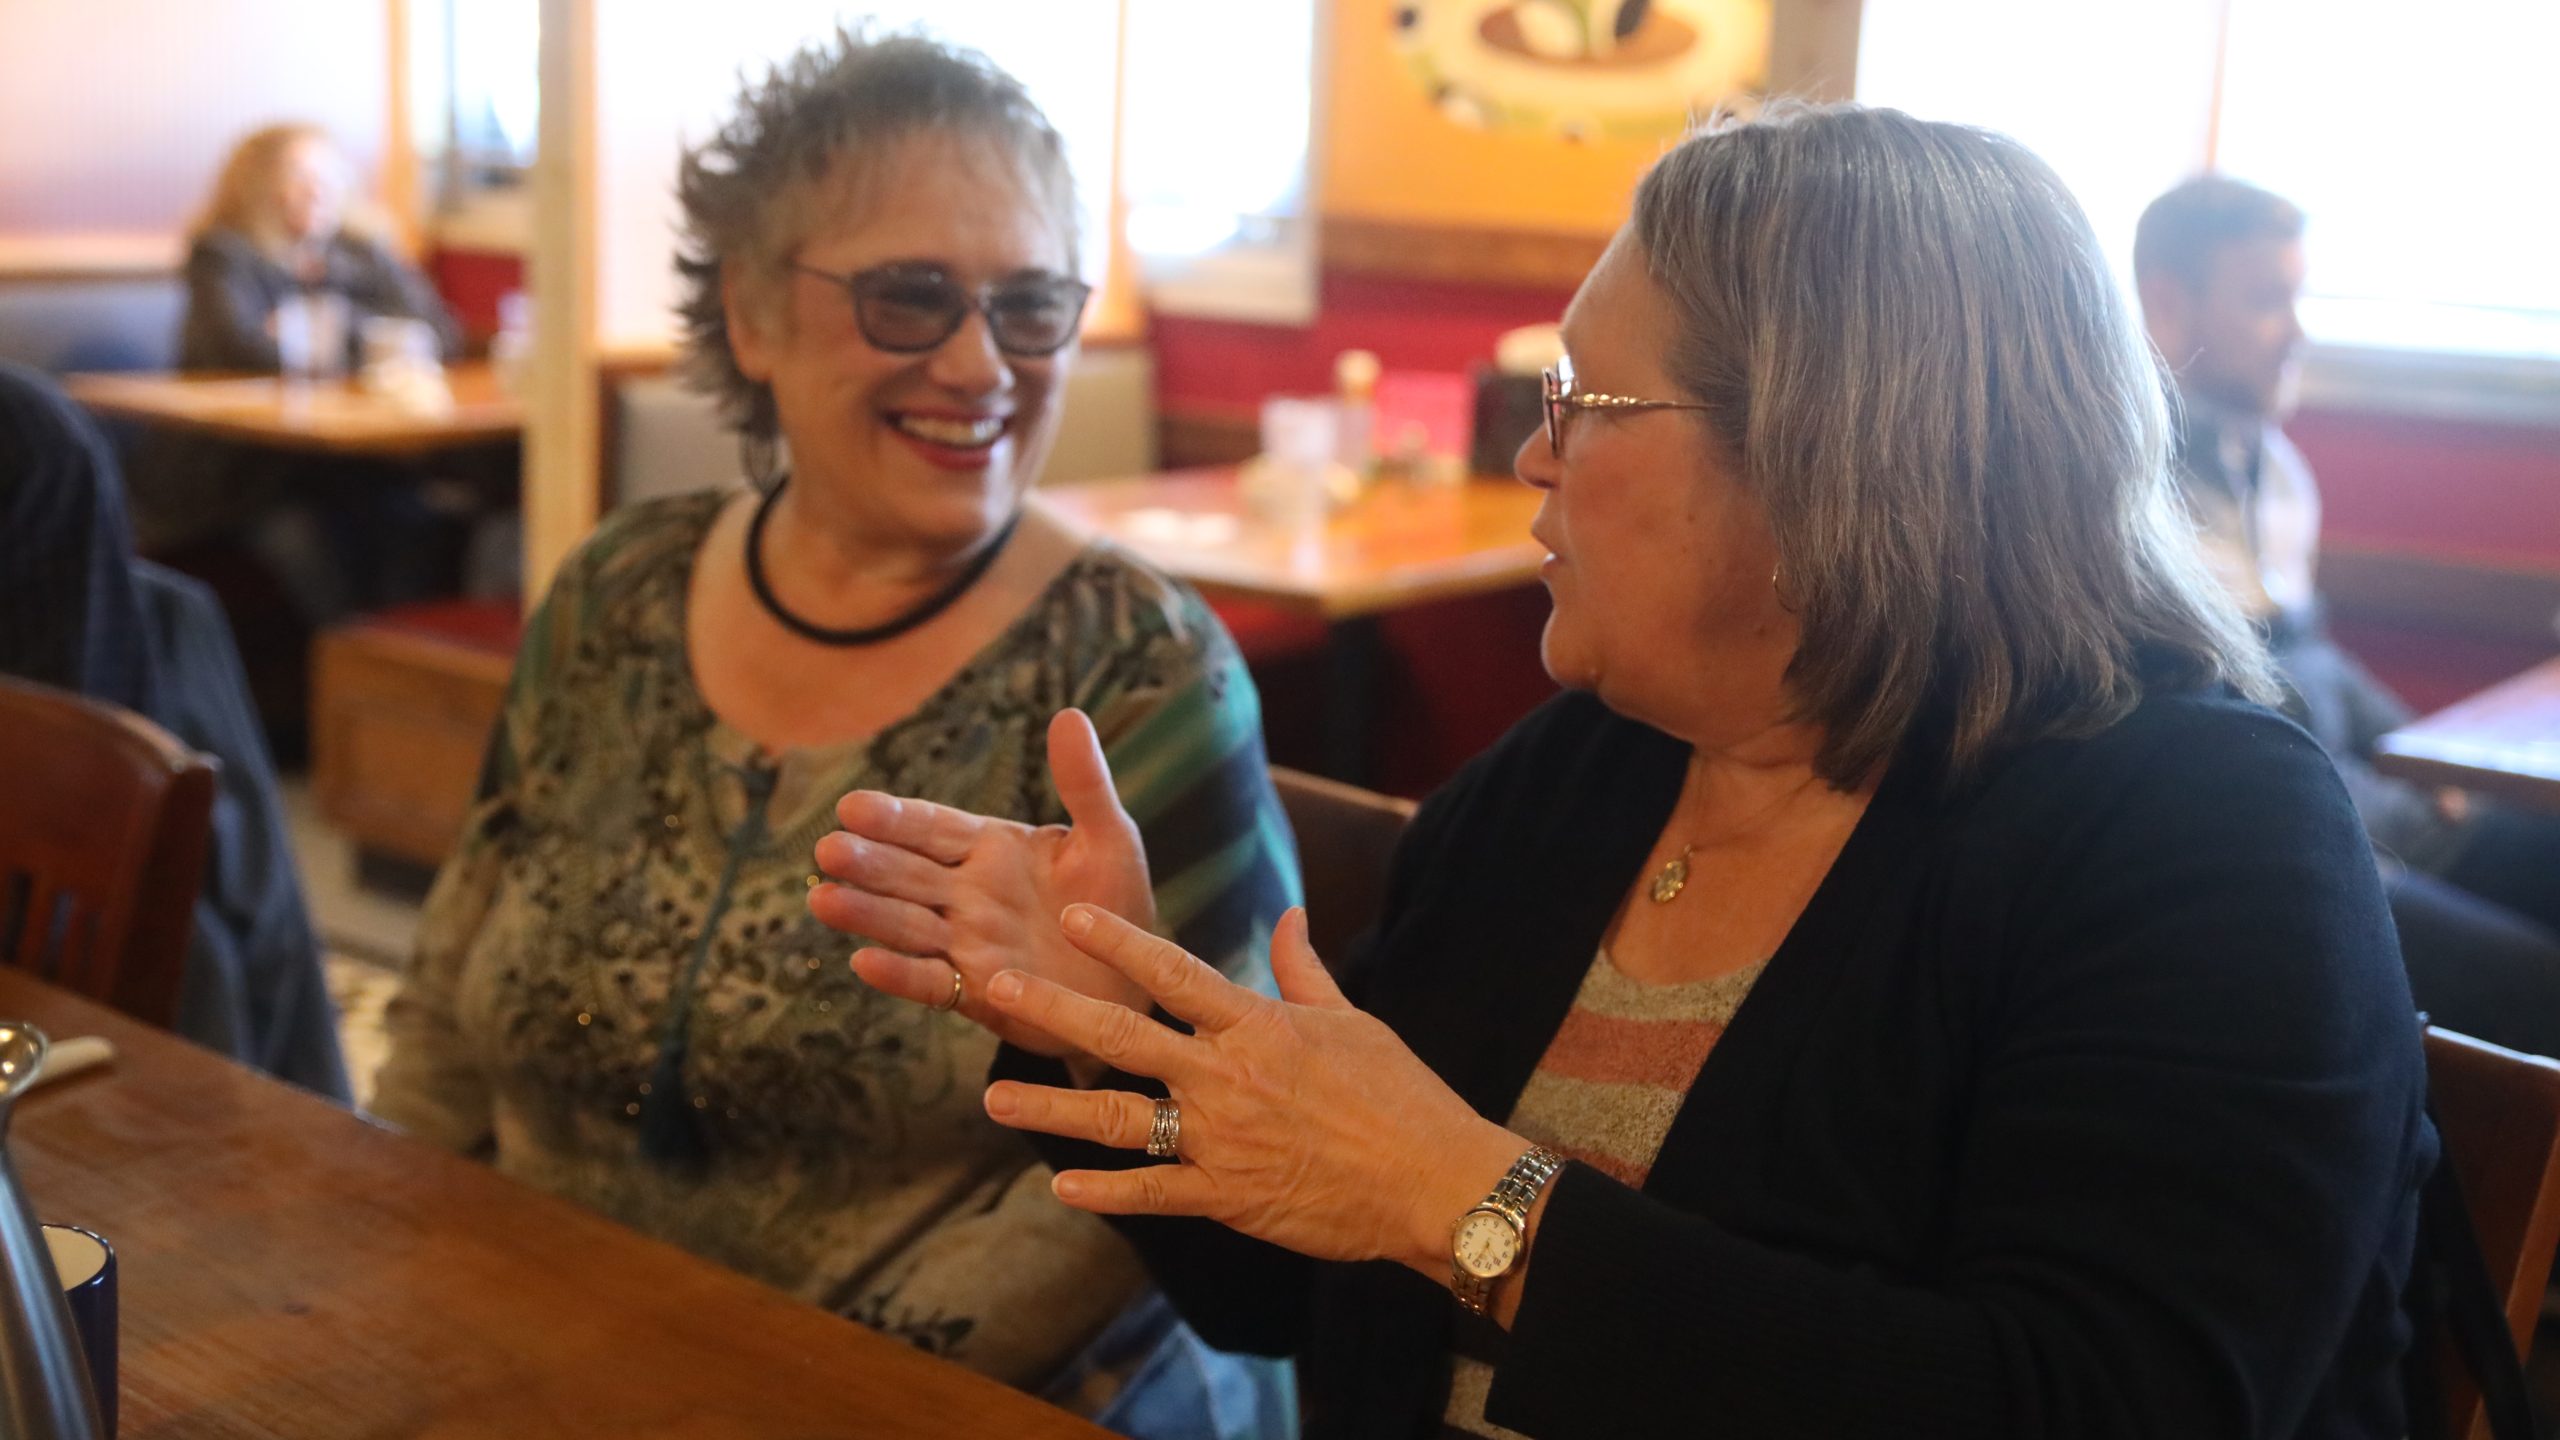 Women talking during 50+ event at cafe